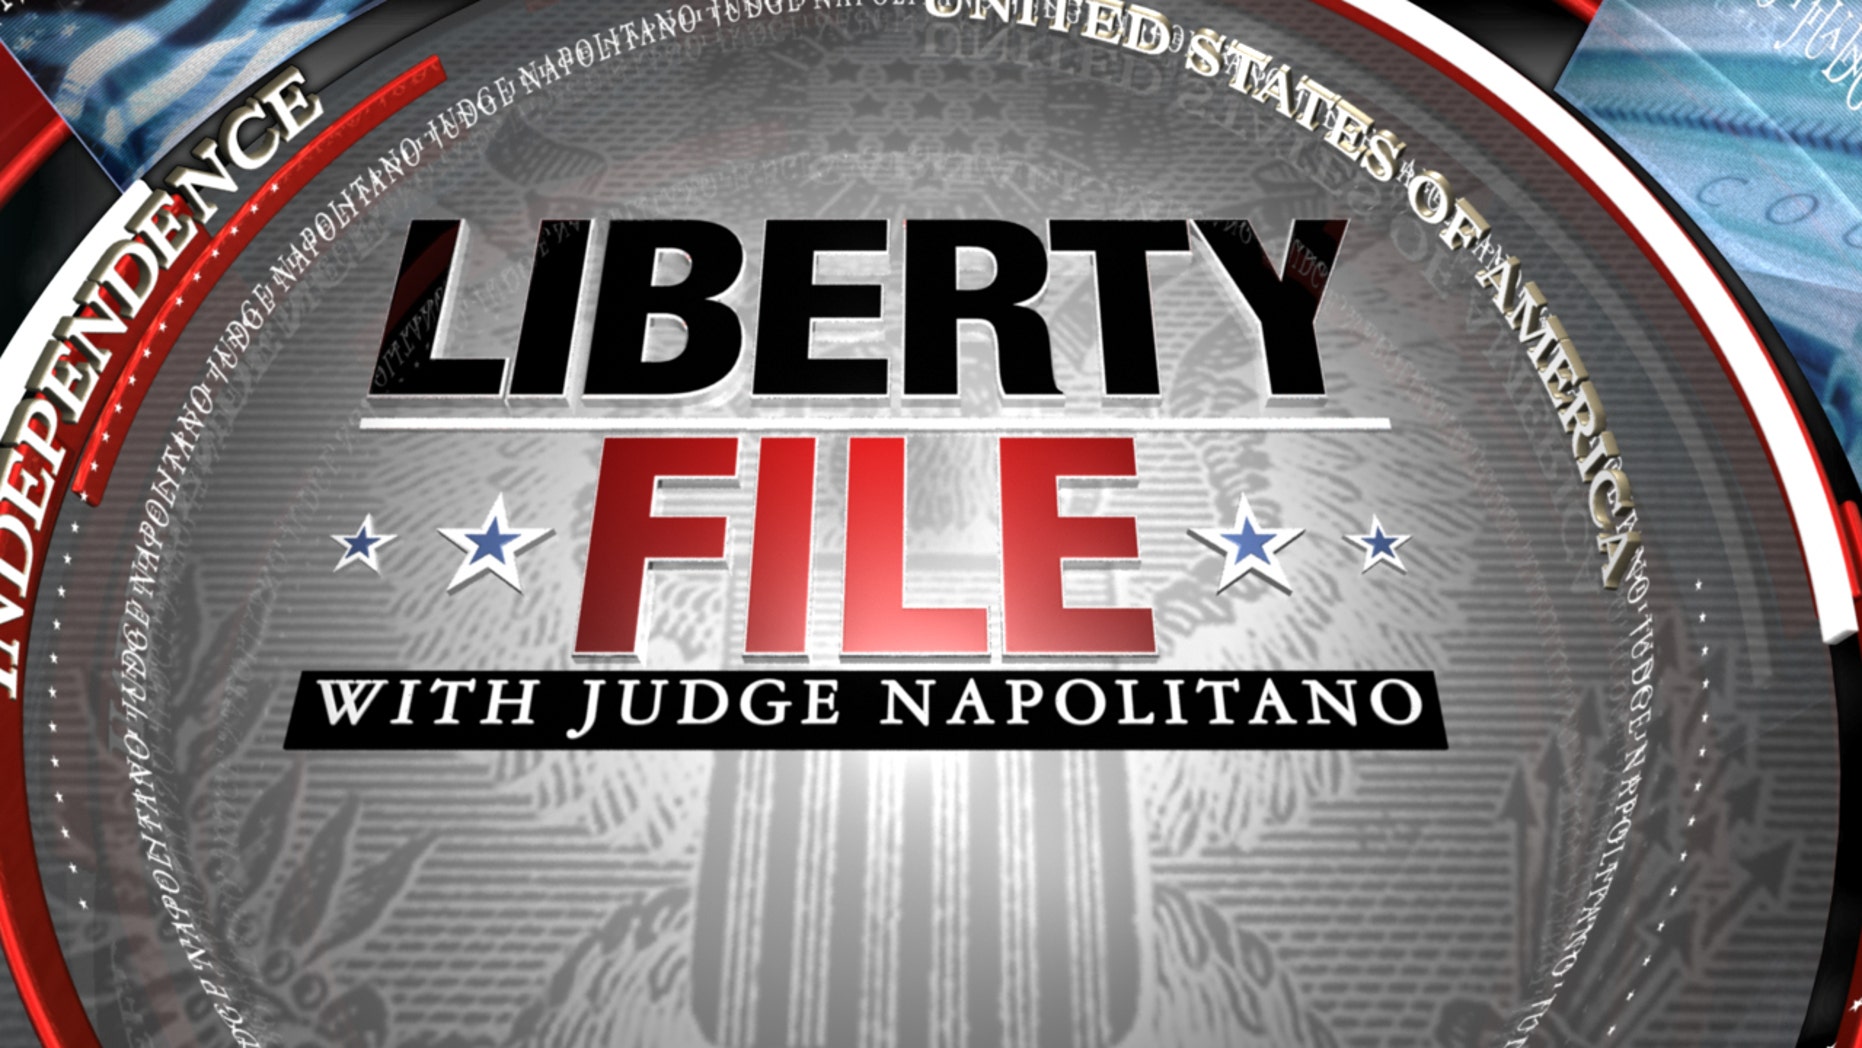 Judge Andrew Napolitano: The right to bear arms